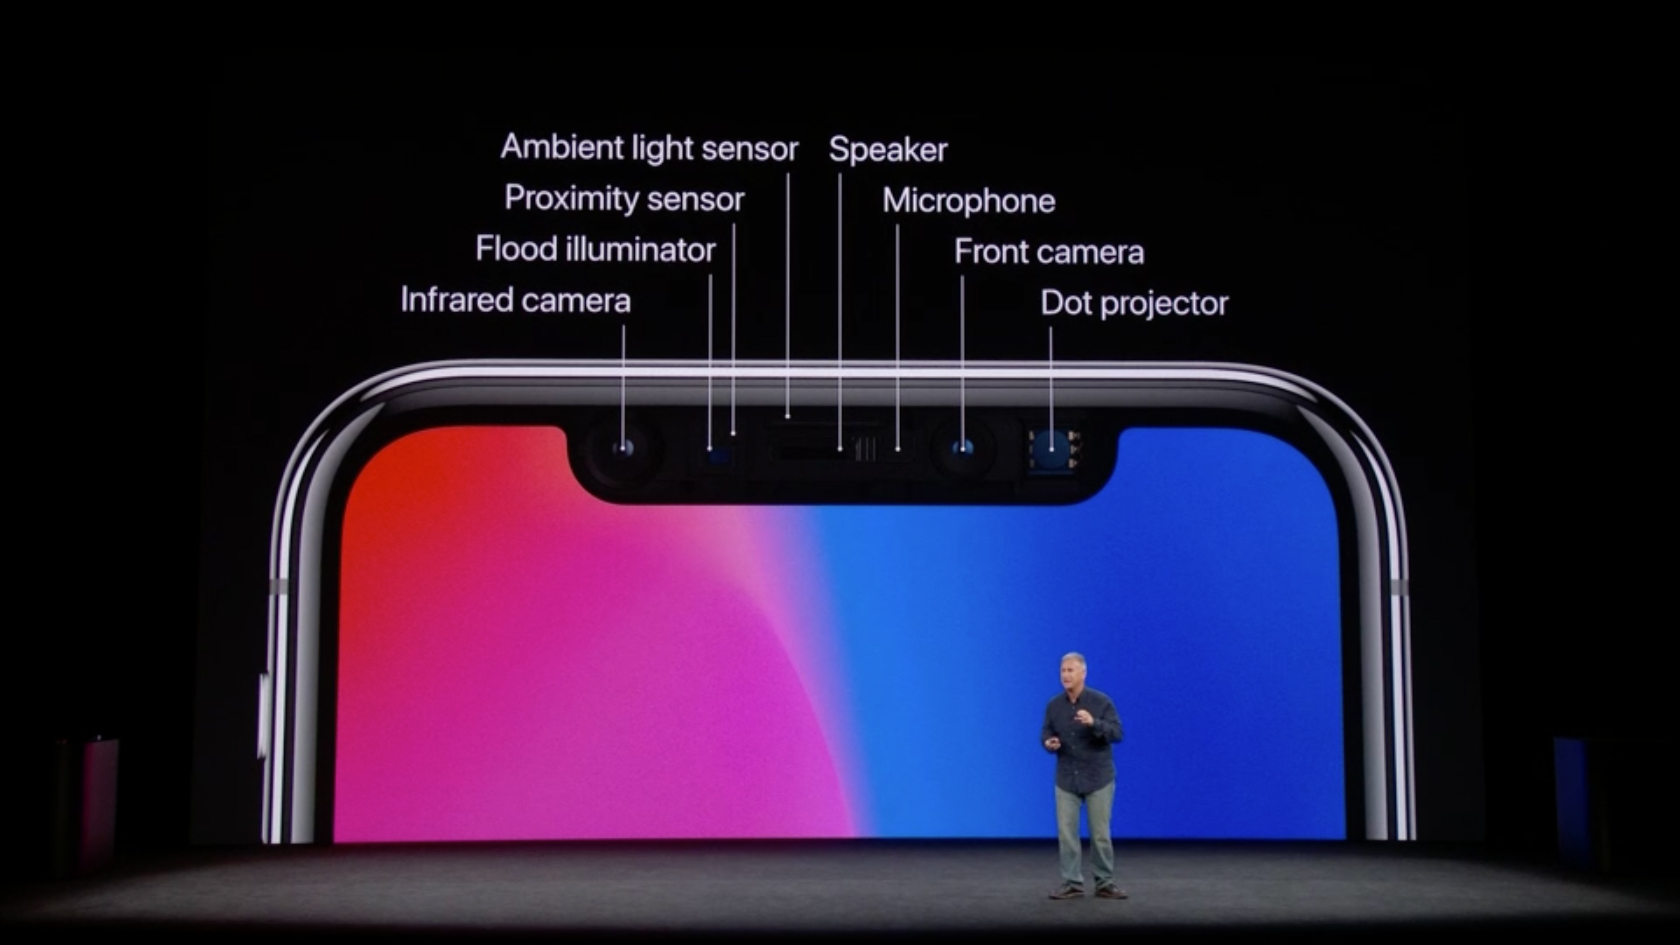 An image of the notch from the iPhone 8 launch event